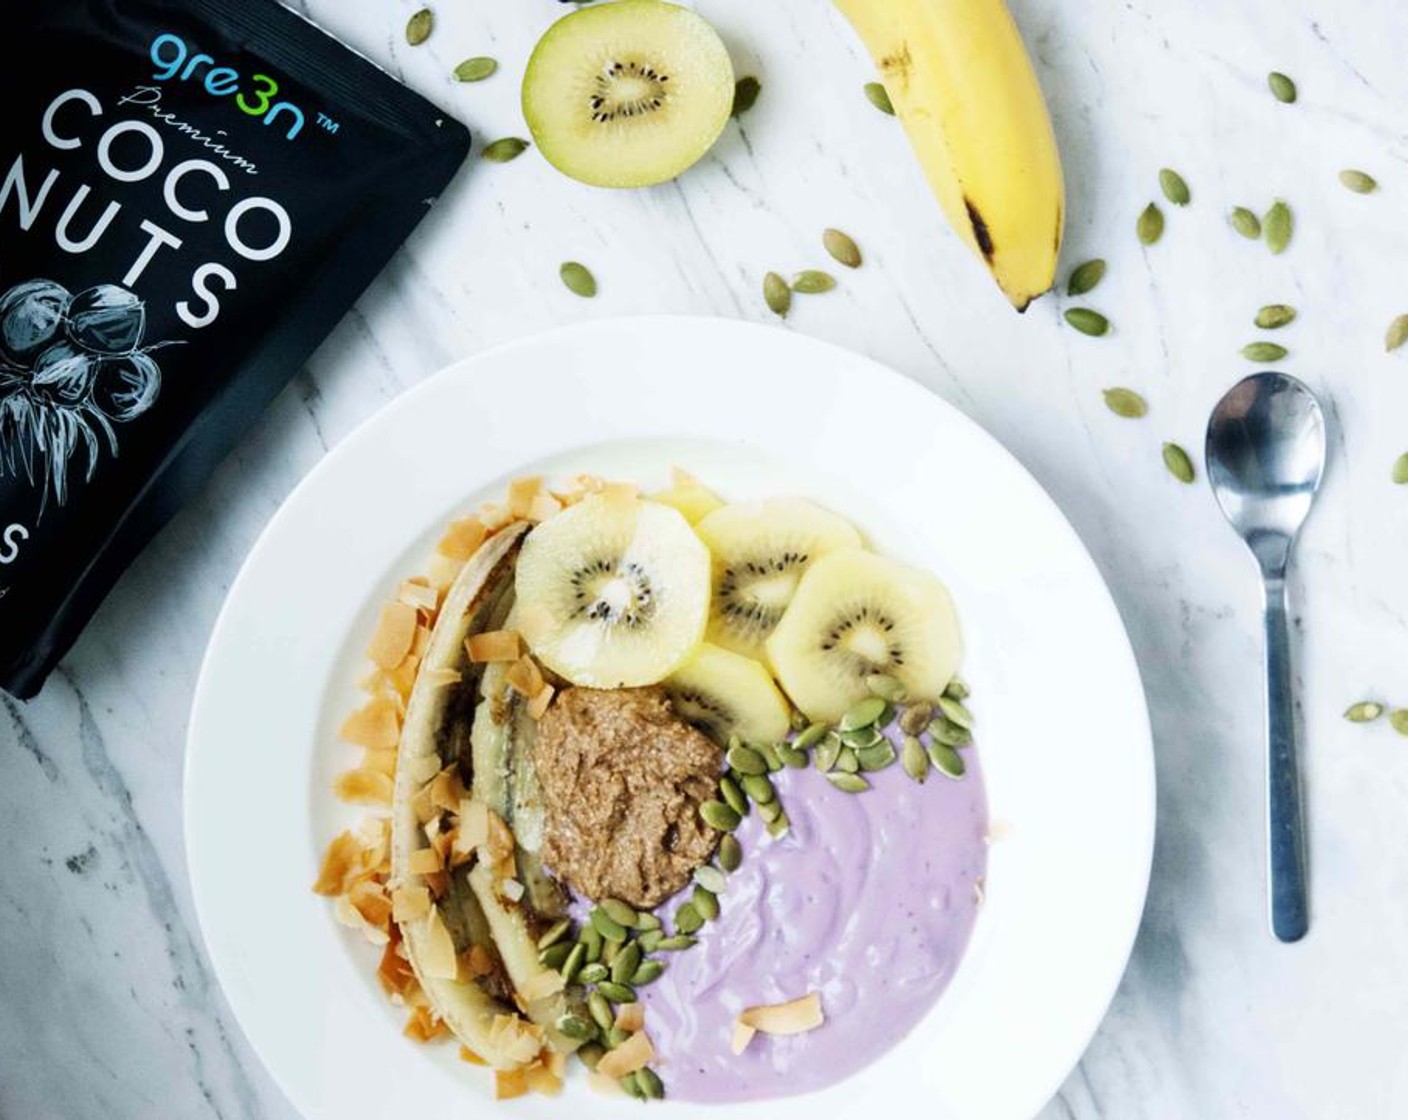 step 2 To assemble your bowl, just scoop out Blueberry Yogurt (1/2 cup) and Natural Almond Butter (2 Tbsp), lay the banana on the side, slice up the Kiwifruit (1/2) and add that too and finish it off by sprinkling Pepitas (1 tsp) and Coconut Chips (1 Tbsp) on top.